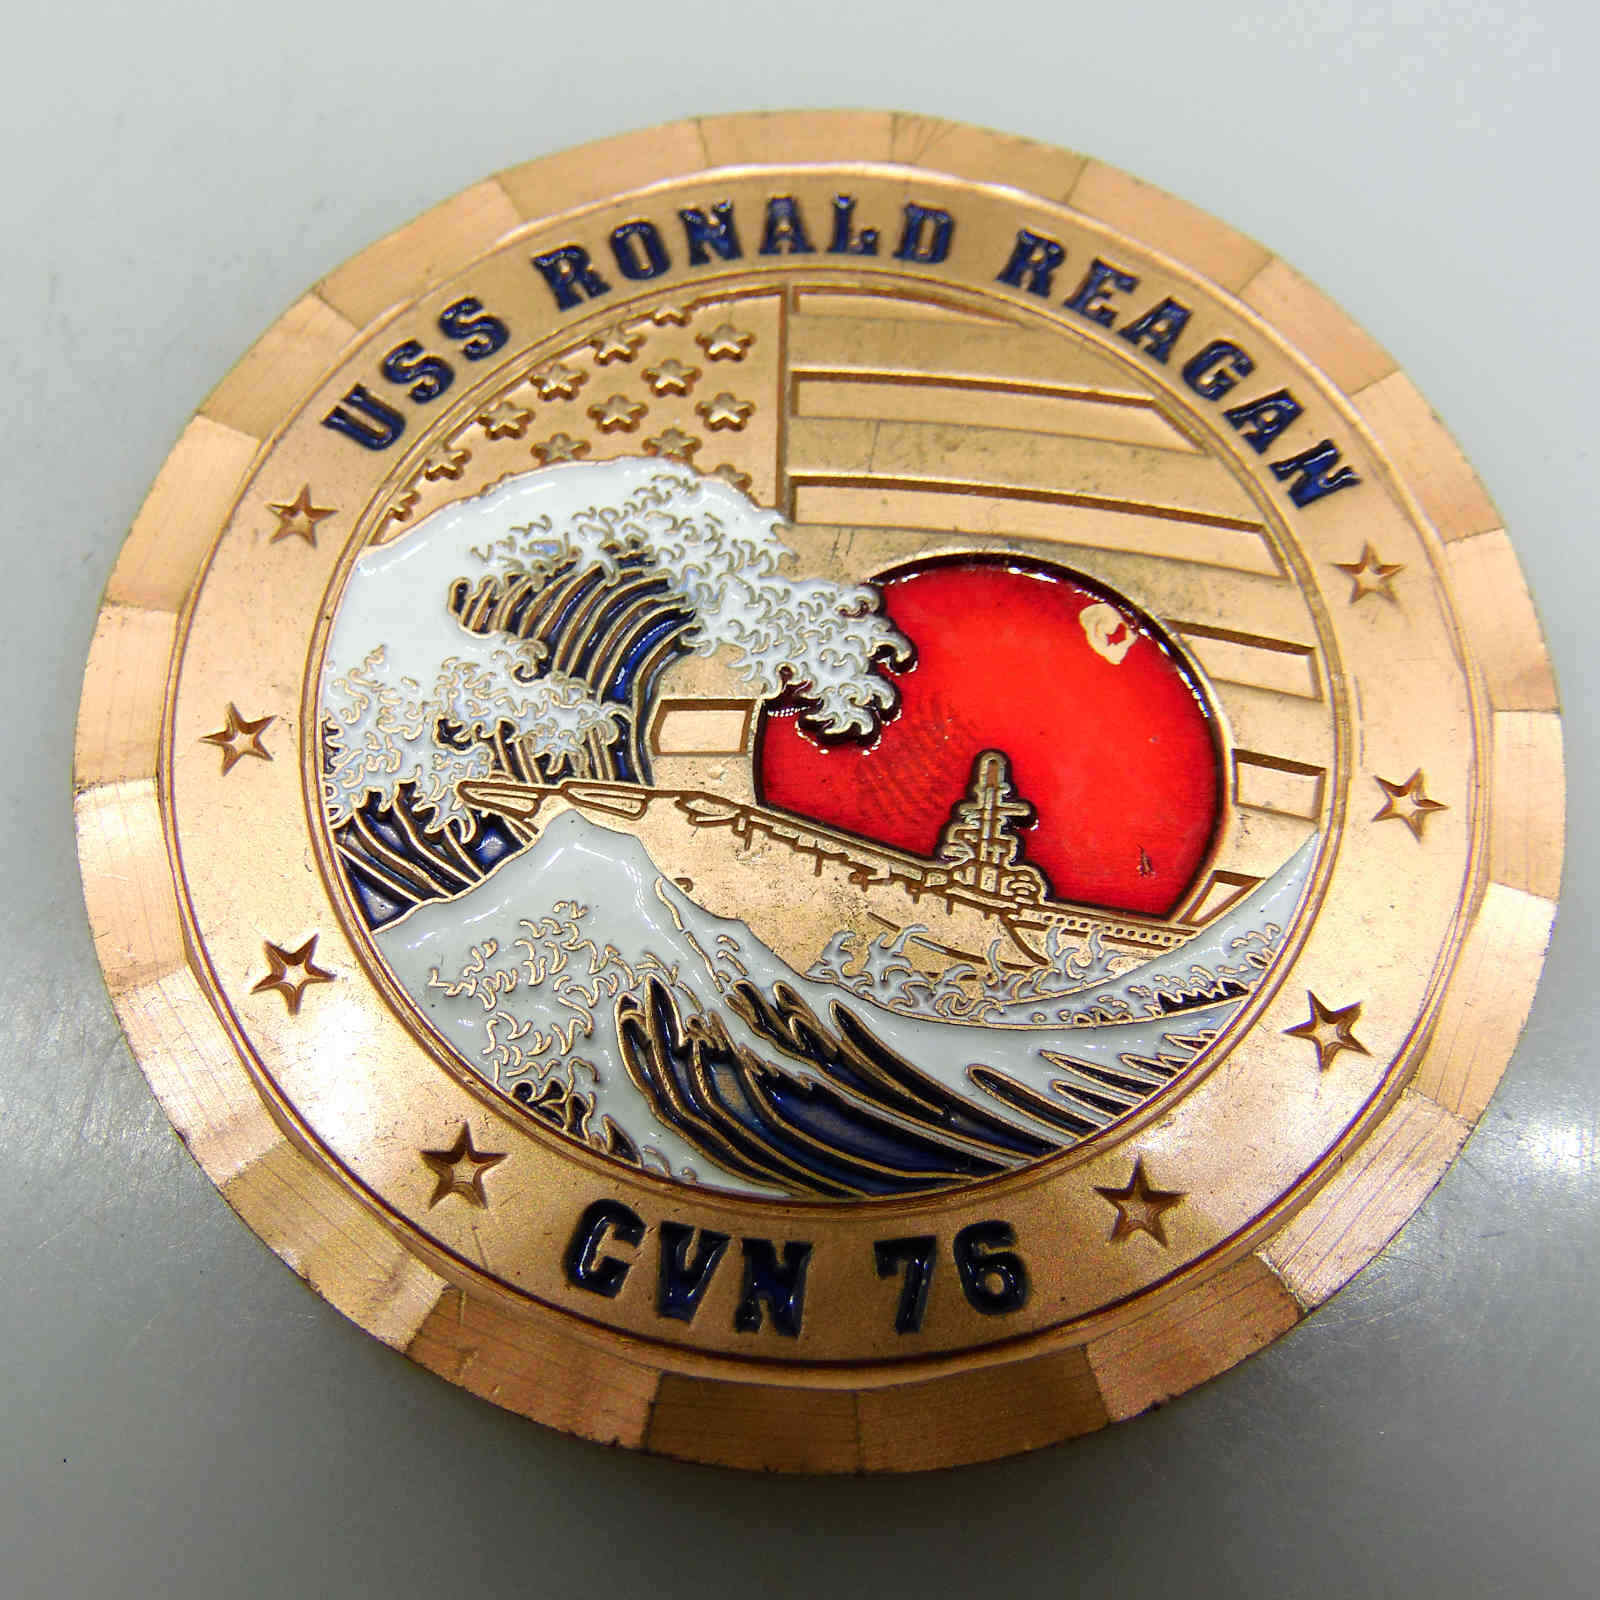 USS RONALD REAGAN CVN 76 FORWARD DEPLOYED NAVAL FORCES CHALLENGE COIN